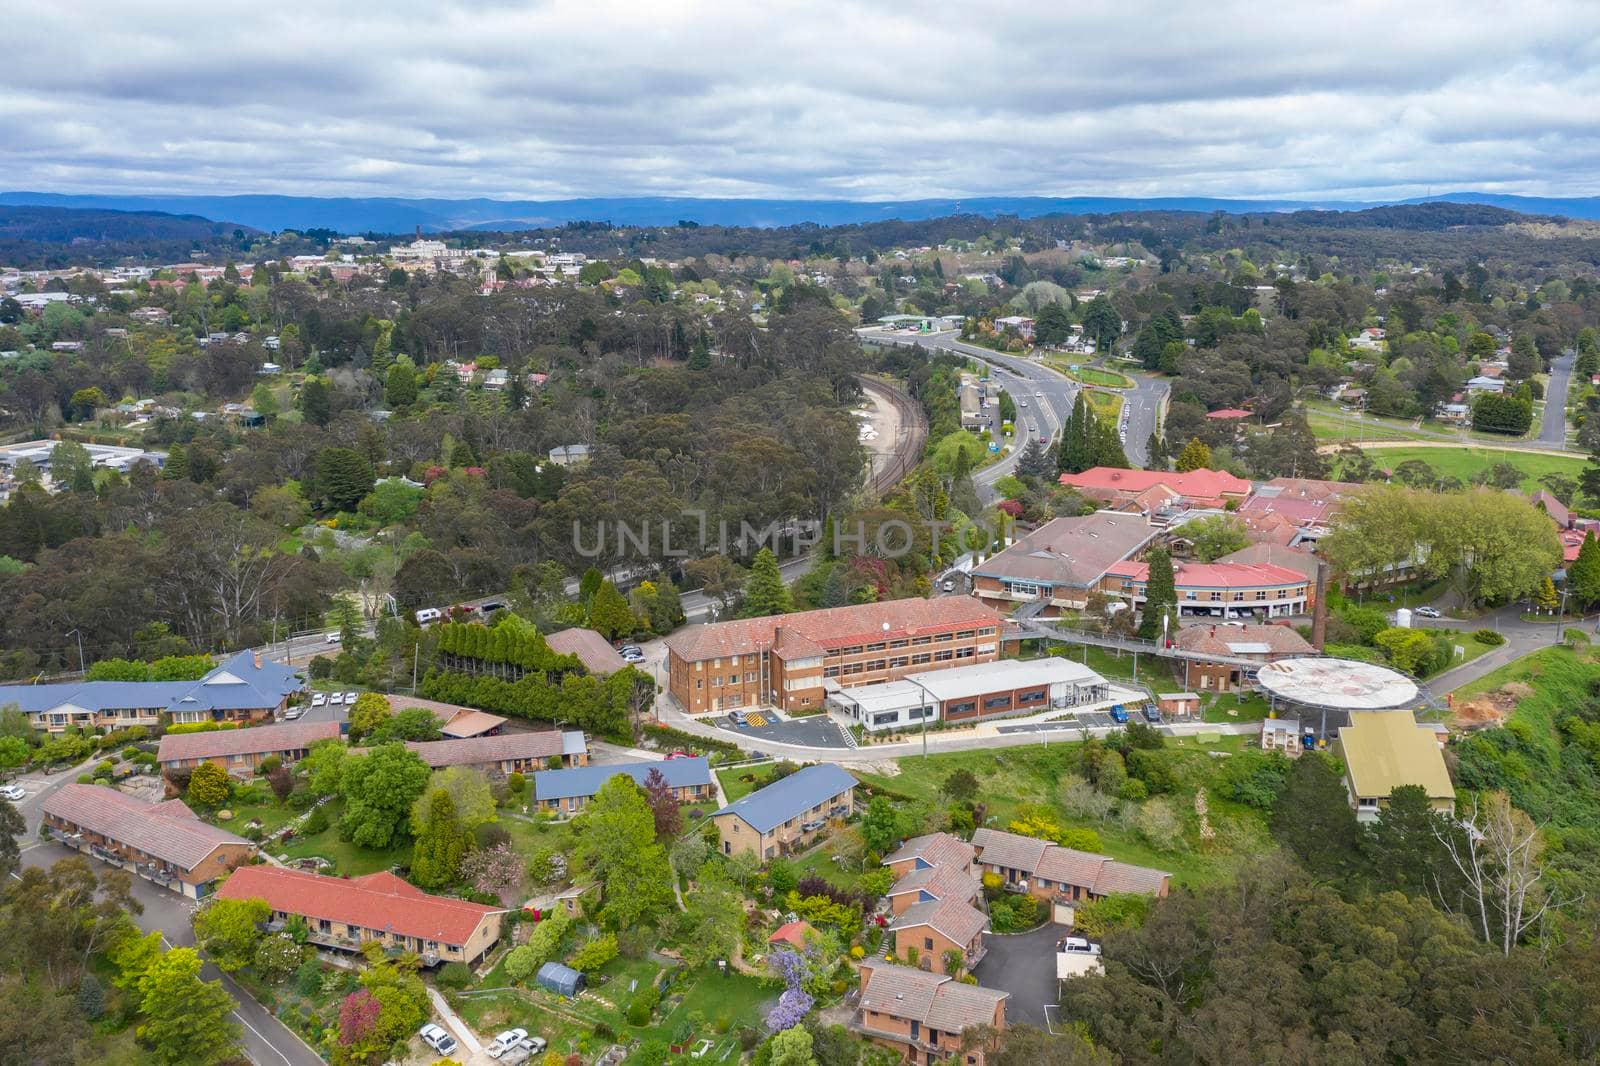 Aerial view of the township of Katoomba in The Blue Mountains in regional New South Wales in Australia